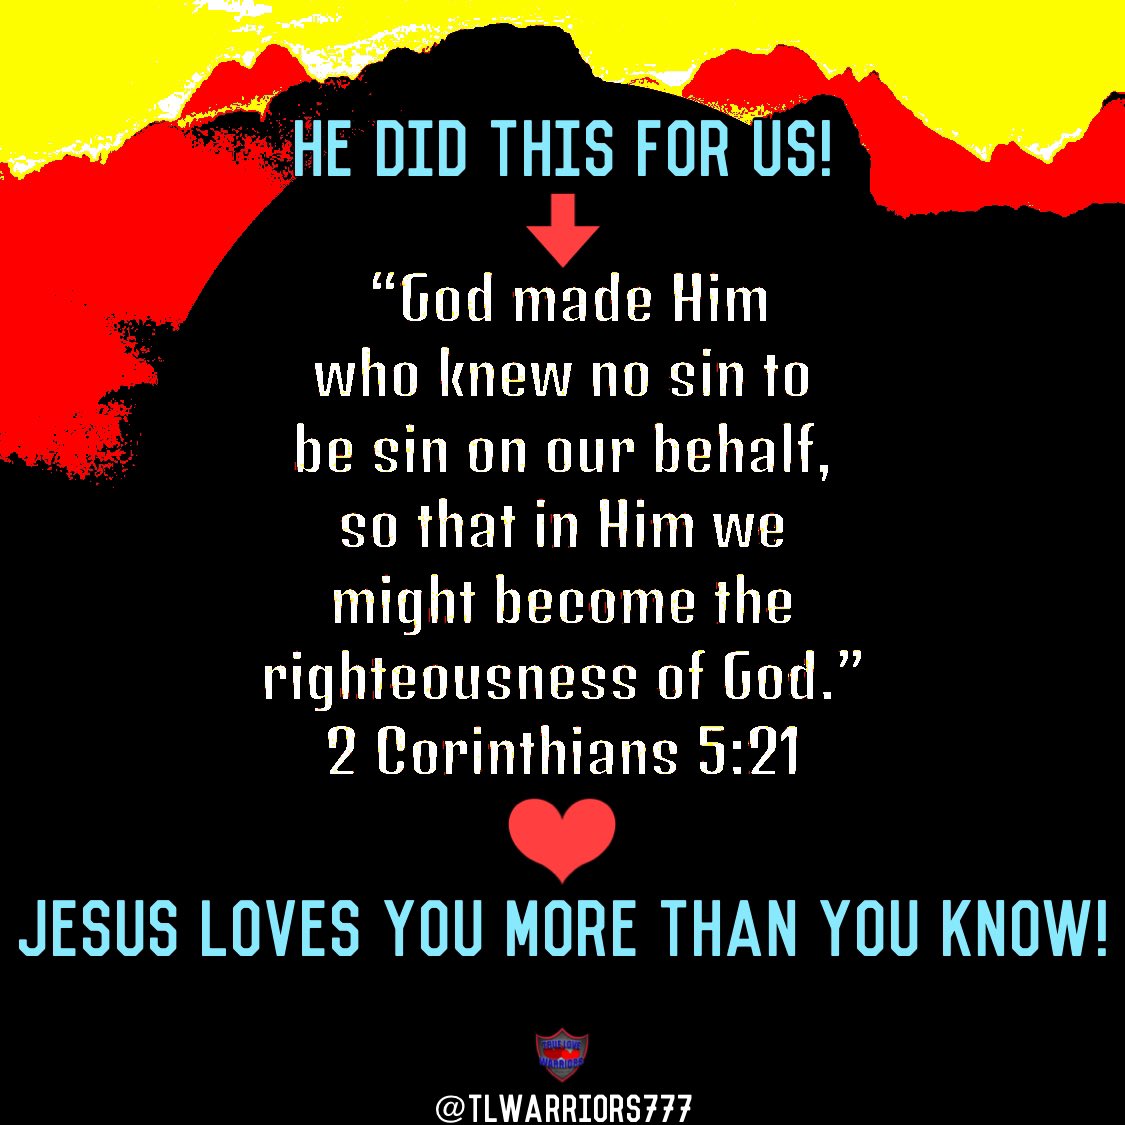 “God made Him who knew no sin to be sin on our behalf, so that in Him we might become the righteousness of God.” 2 Corinthians 5:21